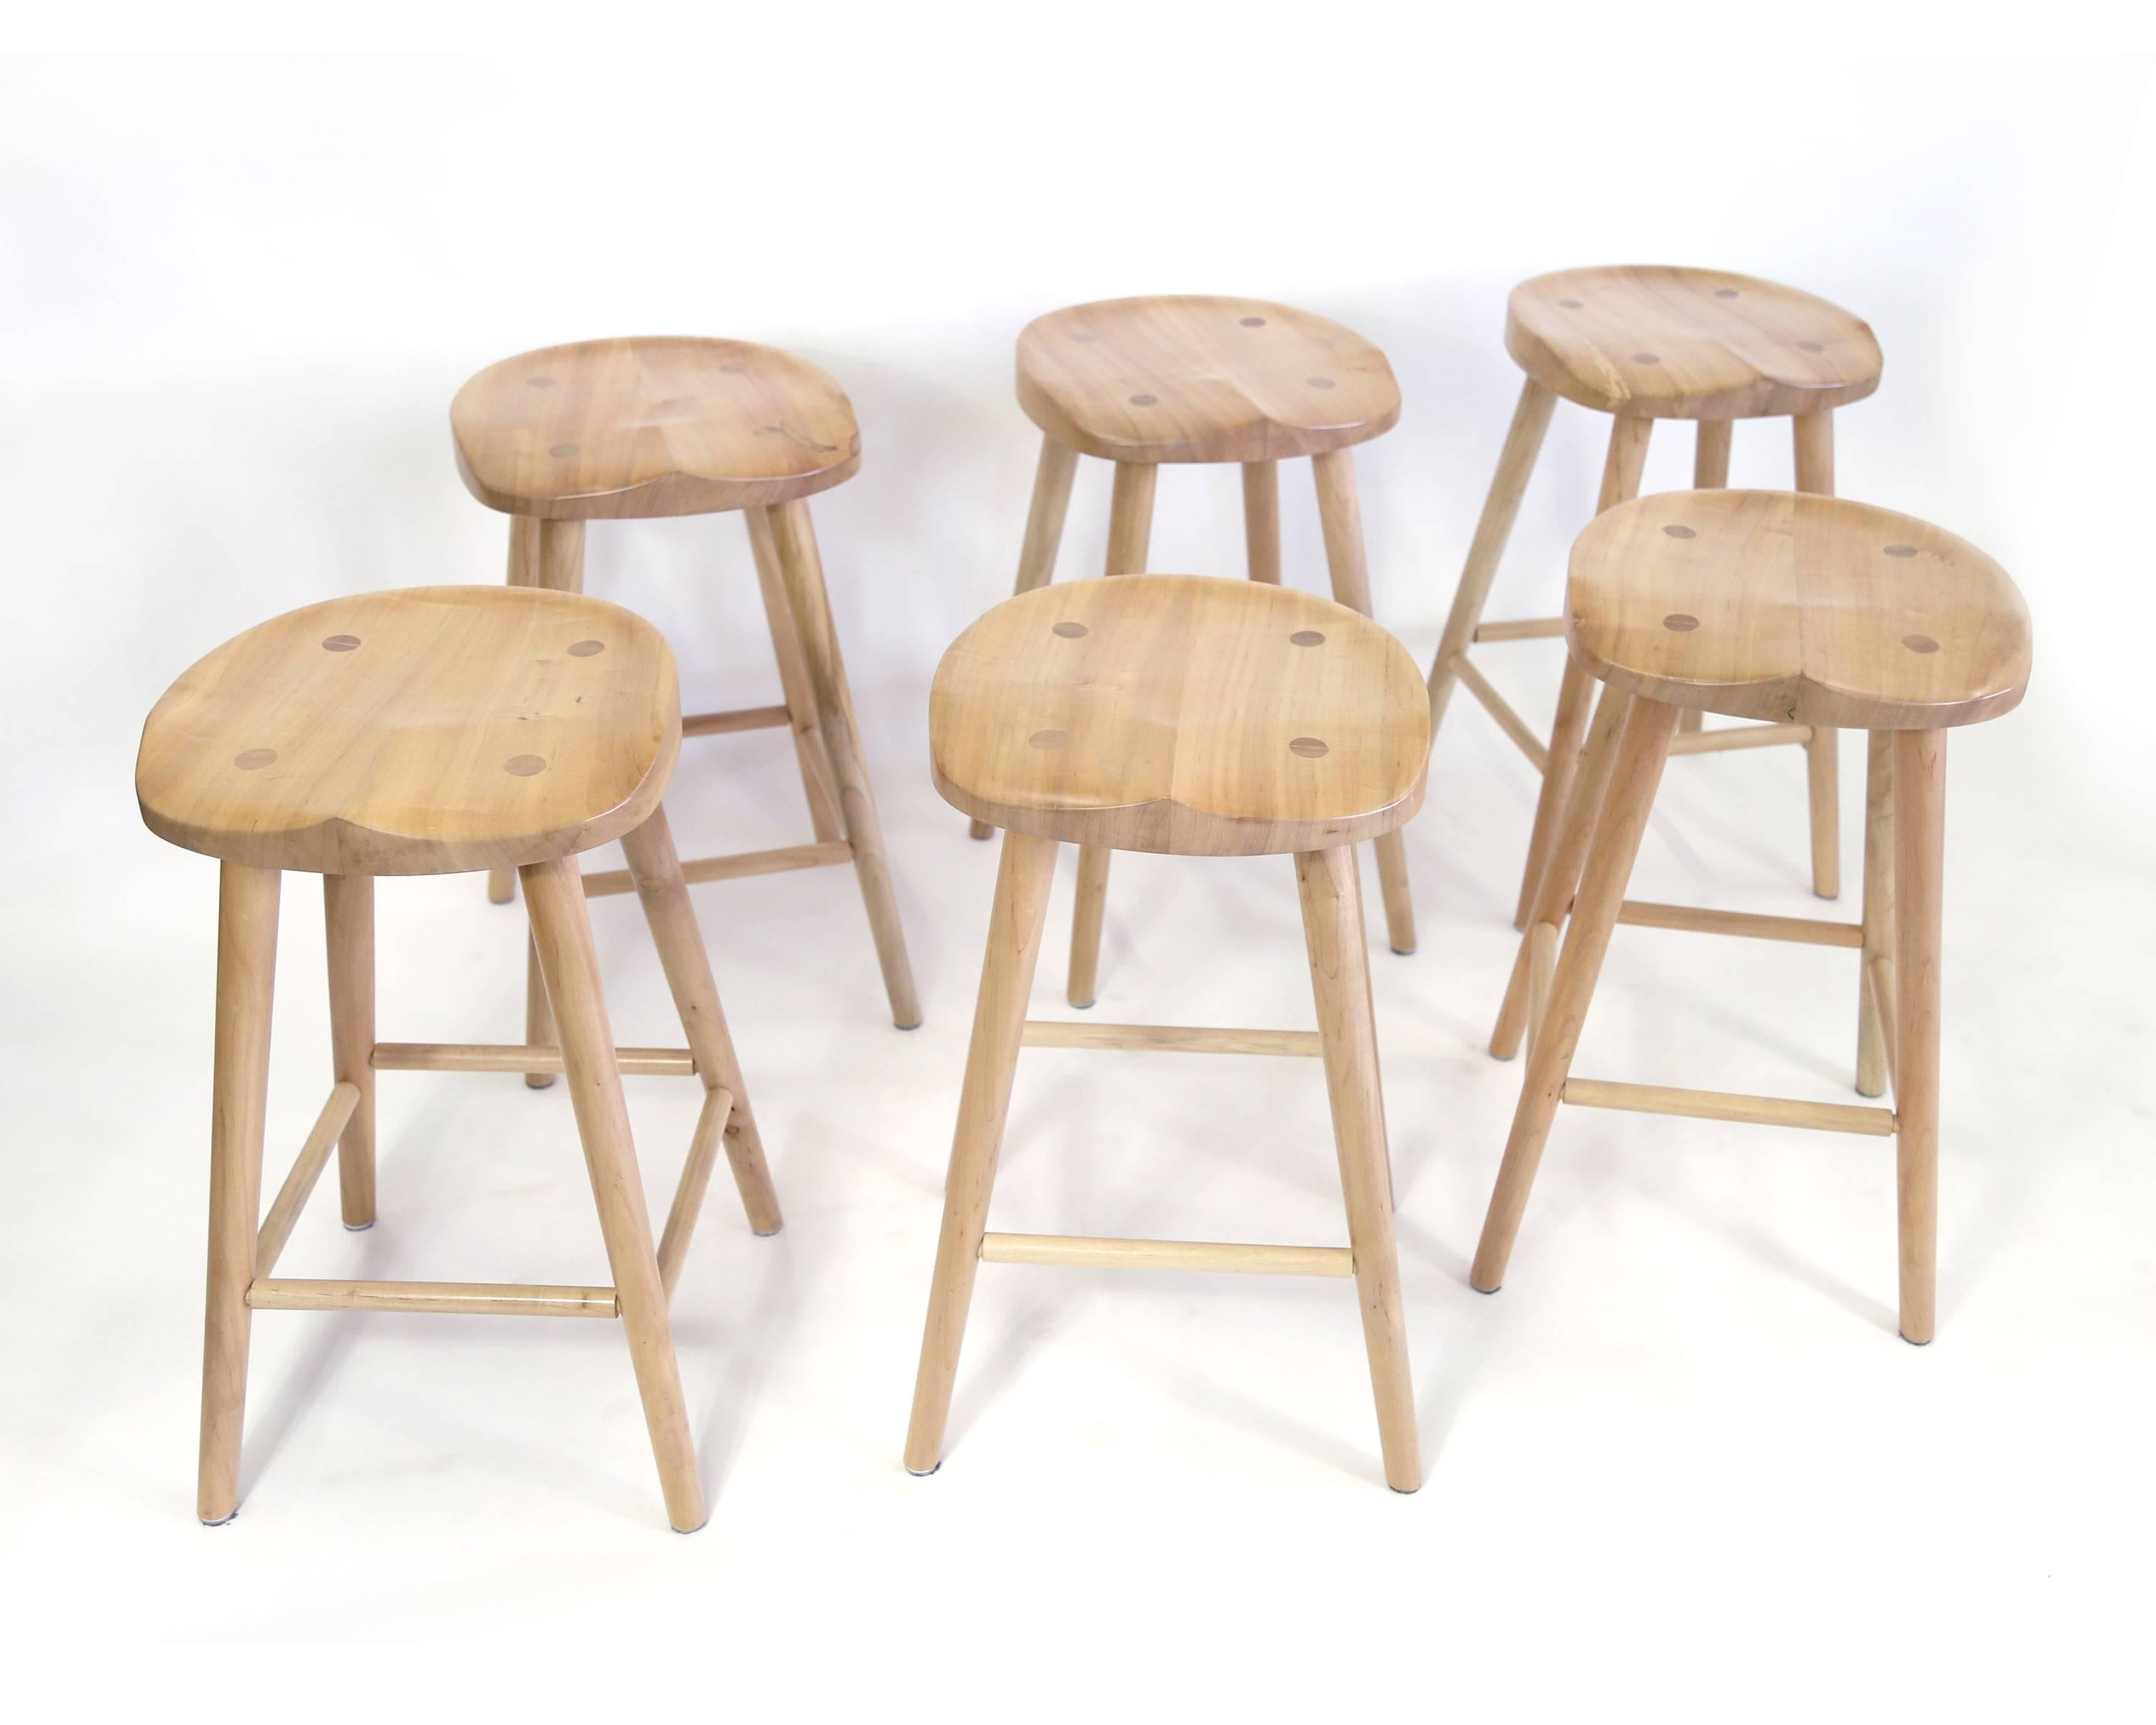 This simple barstool is quite comfortable, and the hand-carved seat keeps you in place for saddling up to the bar for the long haul. These are handmade by Pennsylvania Dutch woodworkers. Set of six existing stools that are like new. Photos are of